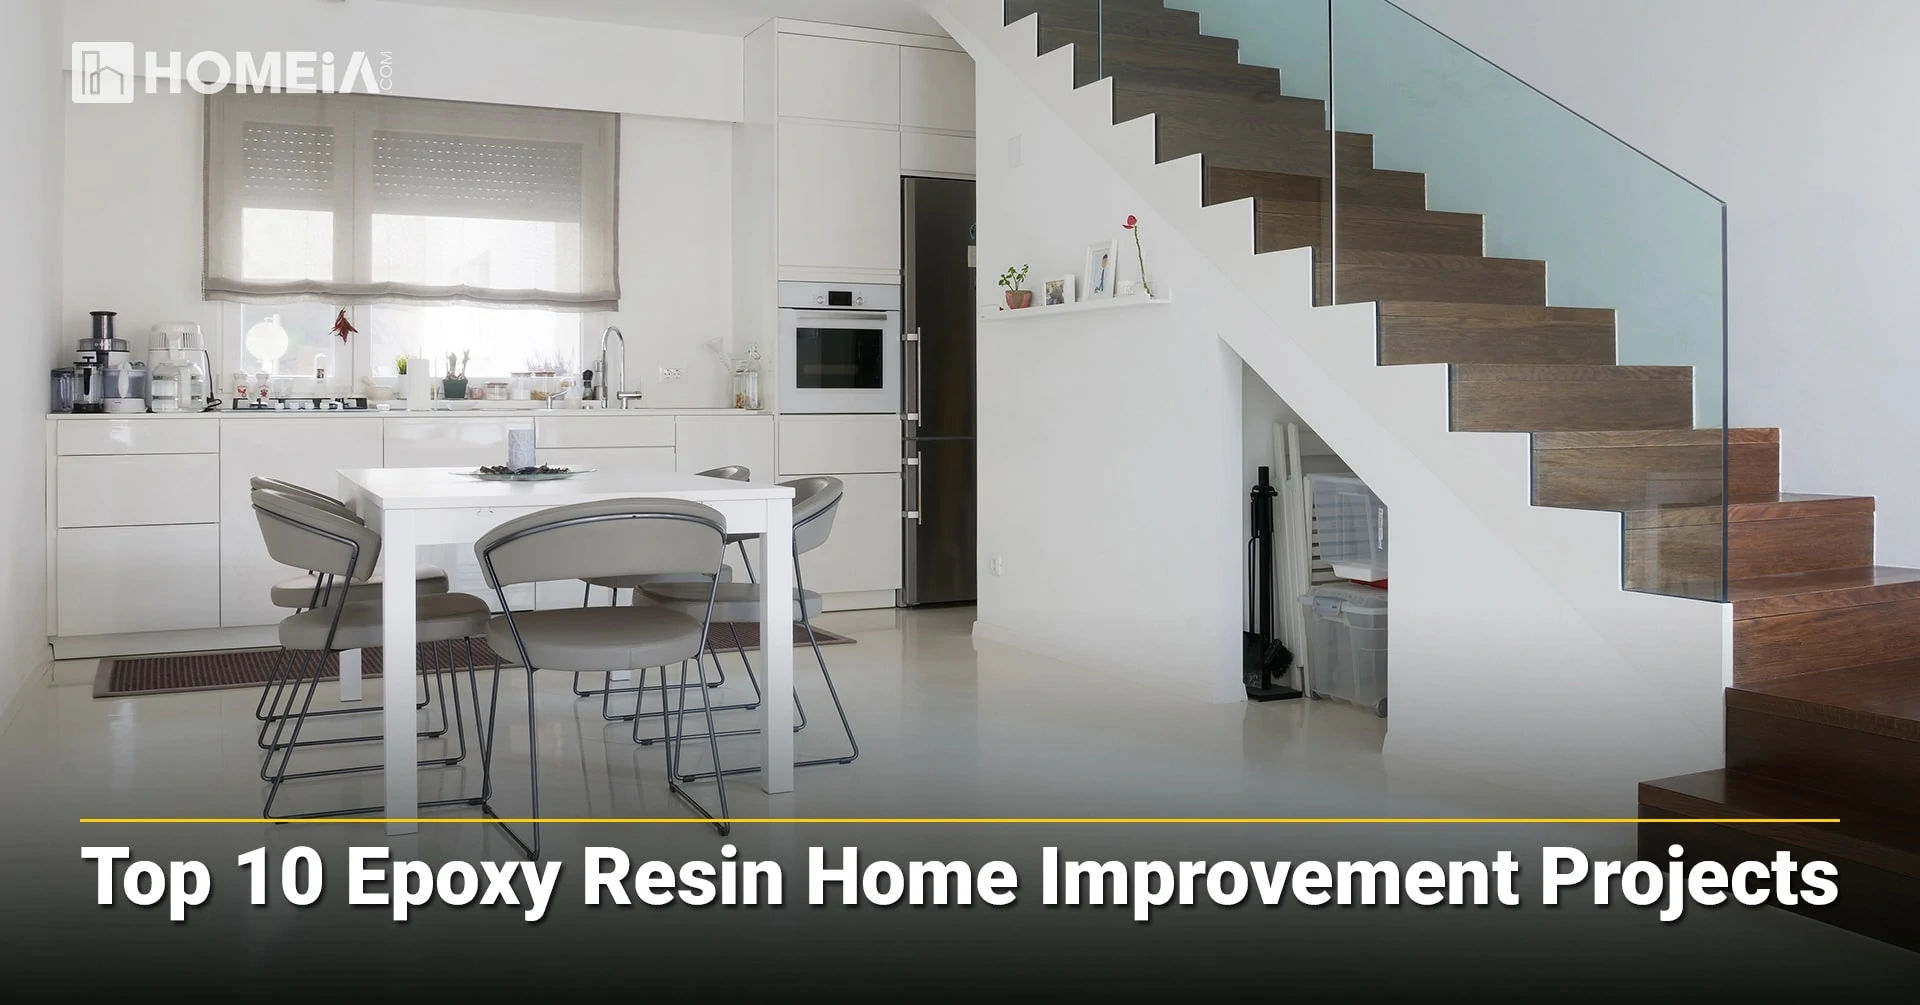 Top 10 Epoxy Resin Home Improvement Projects